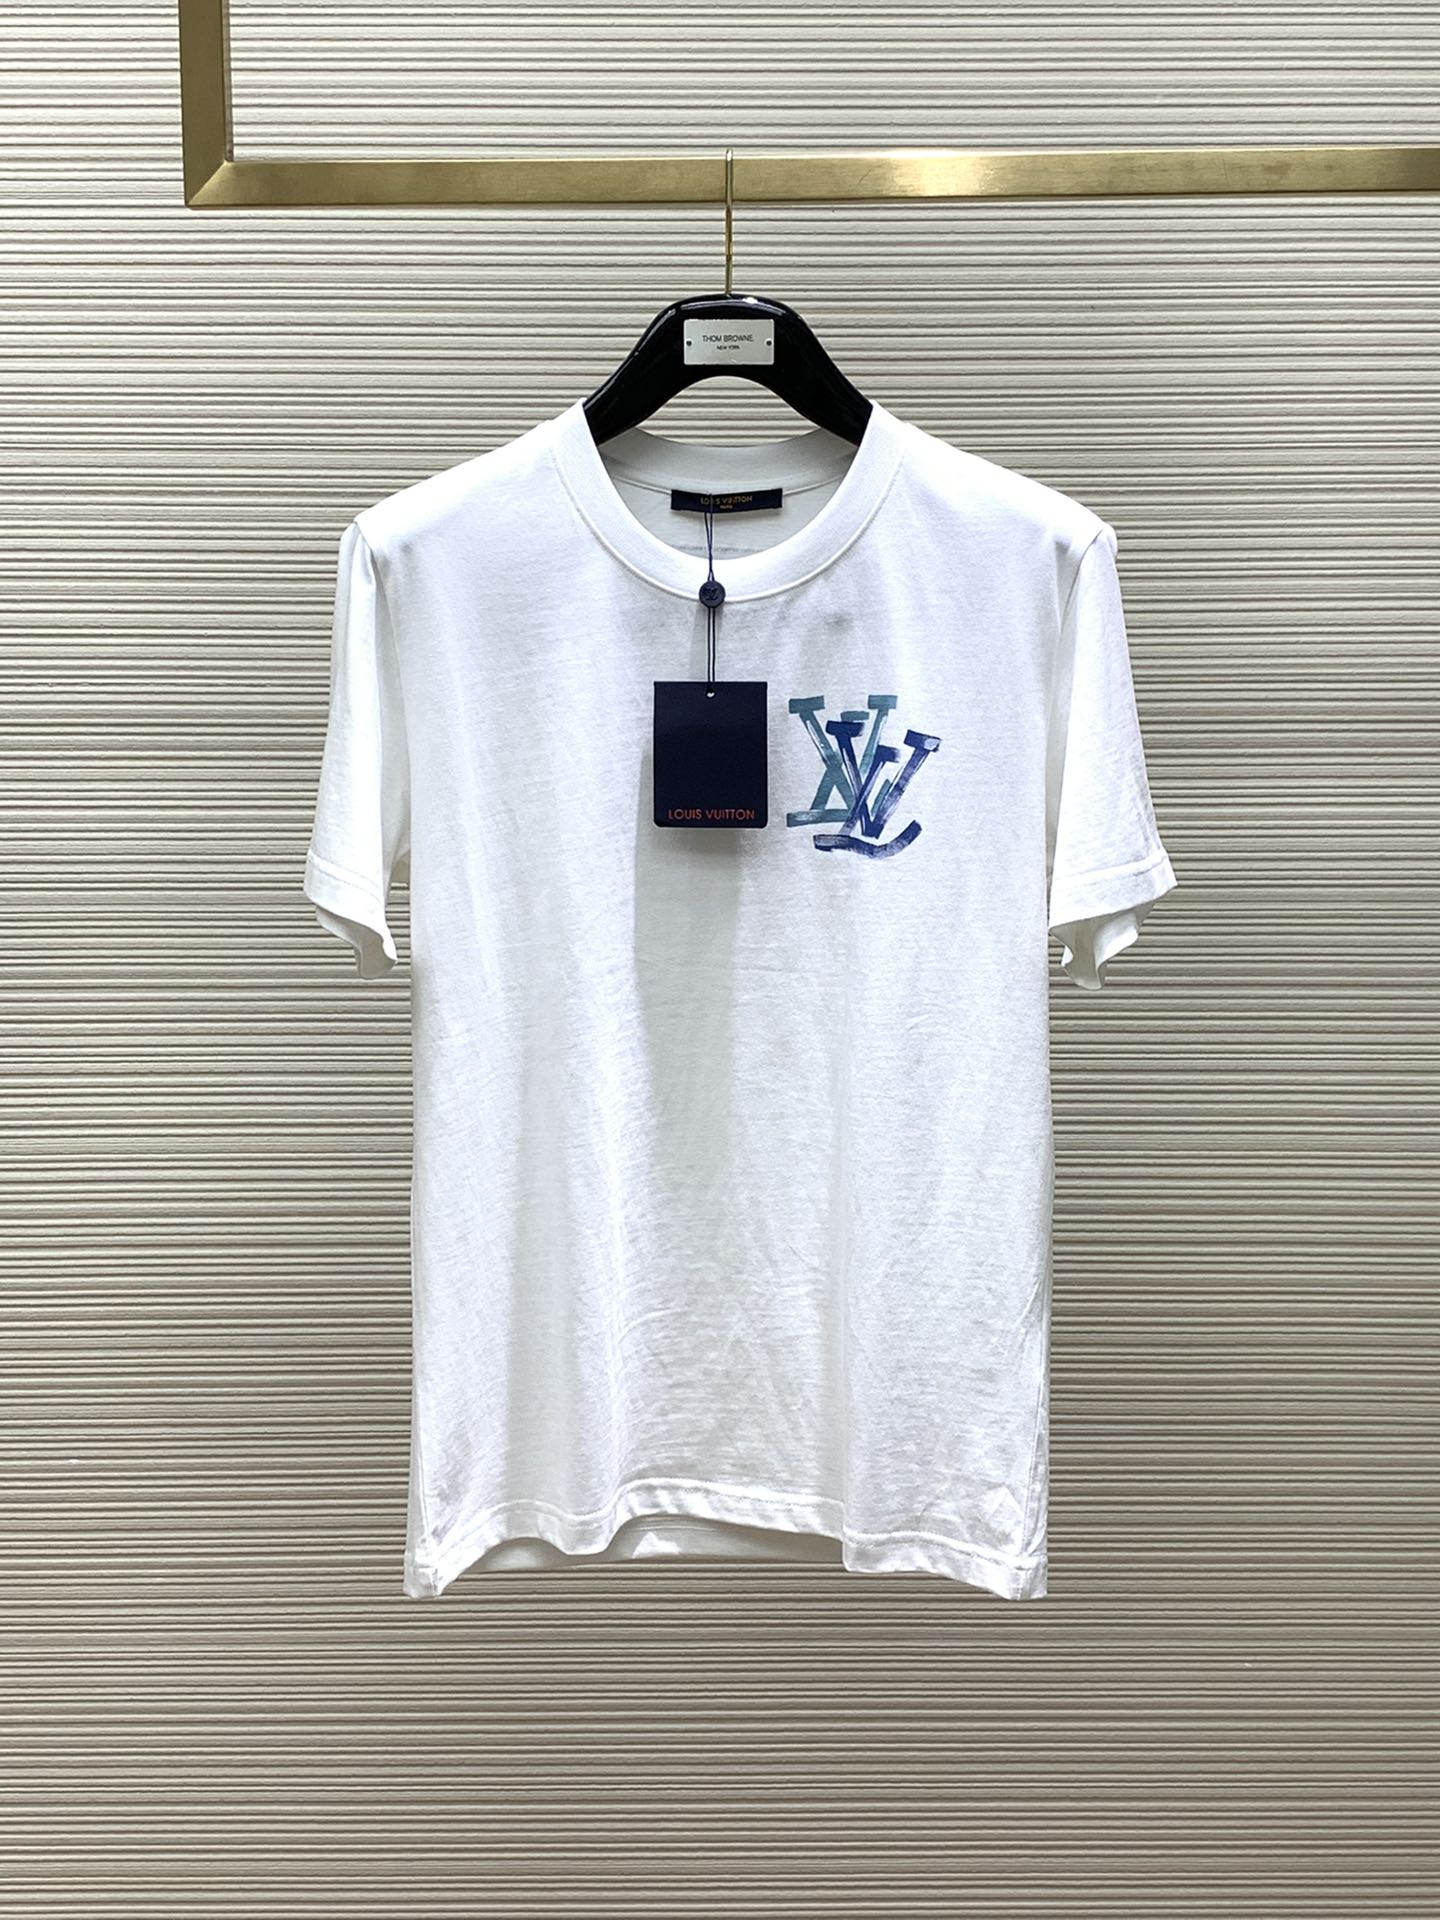 Louis Vuitton Clothing T-Shirt Exclusive Cheap
 Printing Summer Collection Fashion Short Sleeve